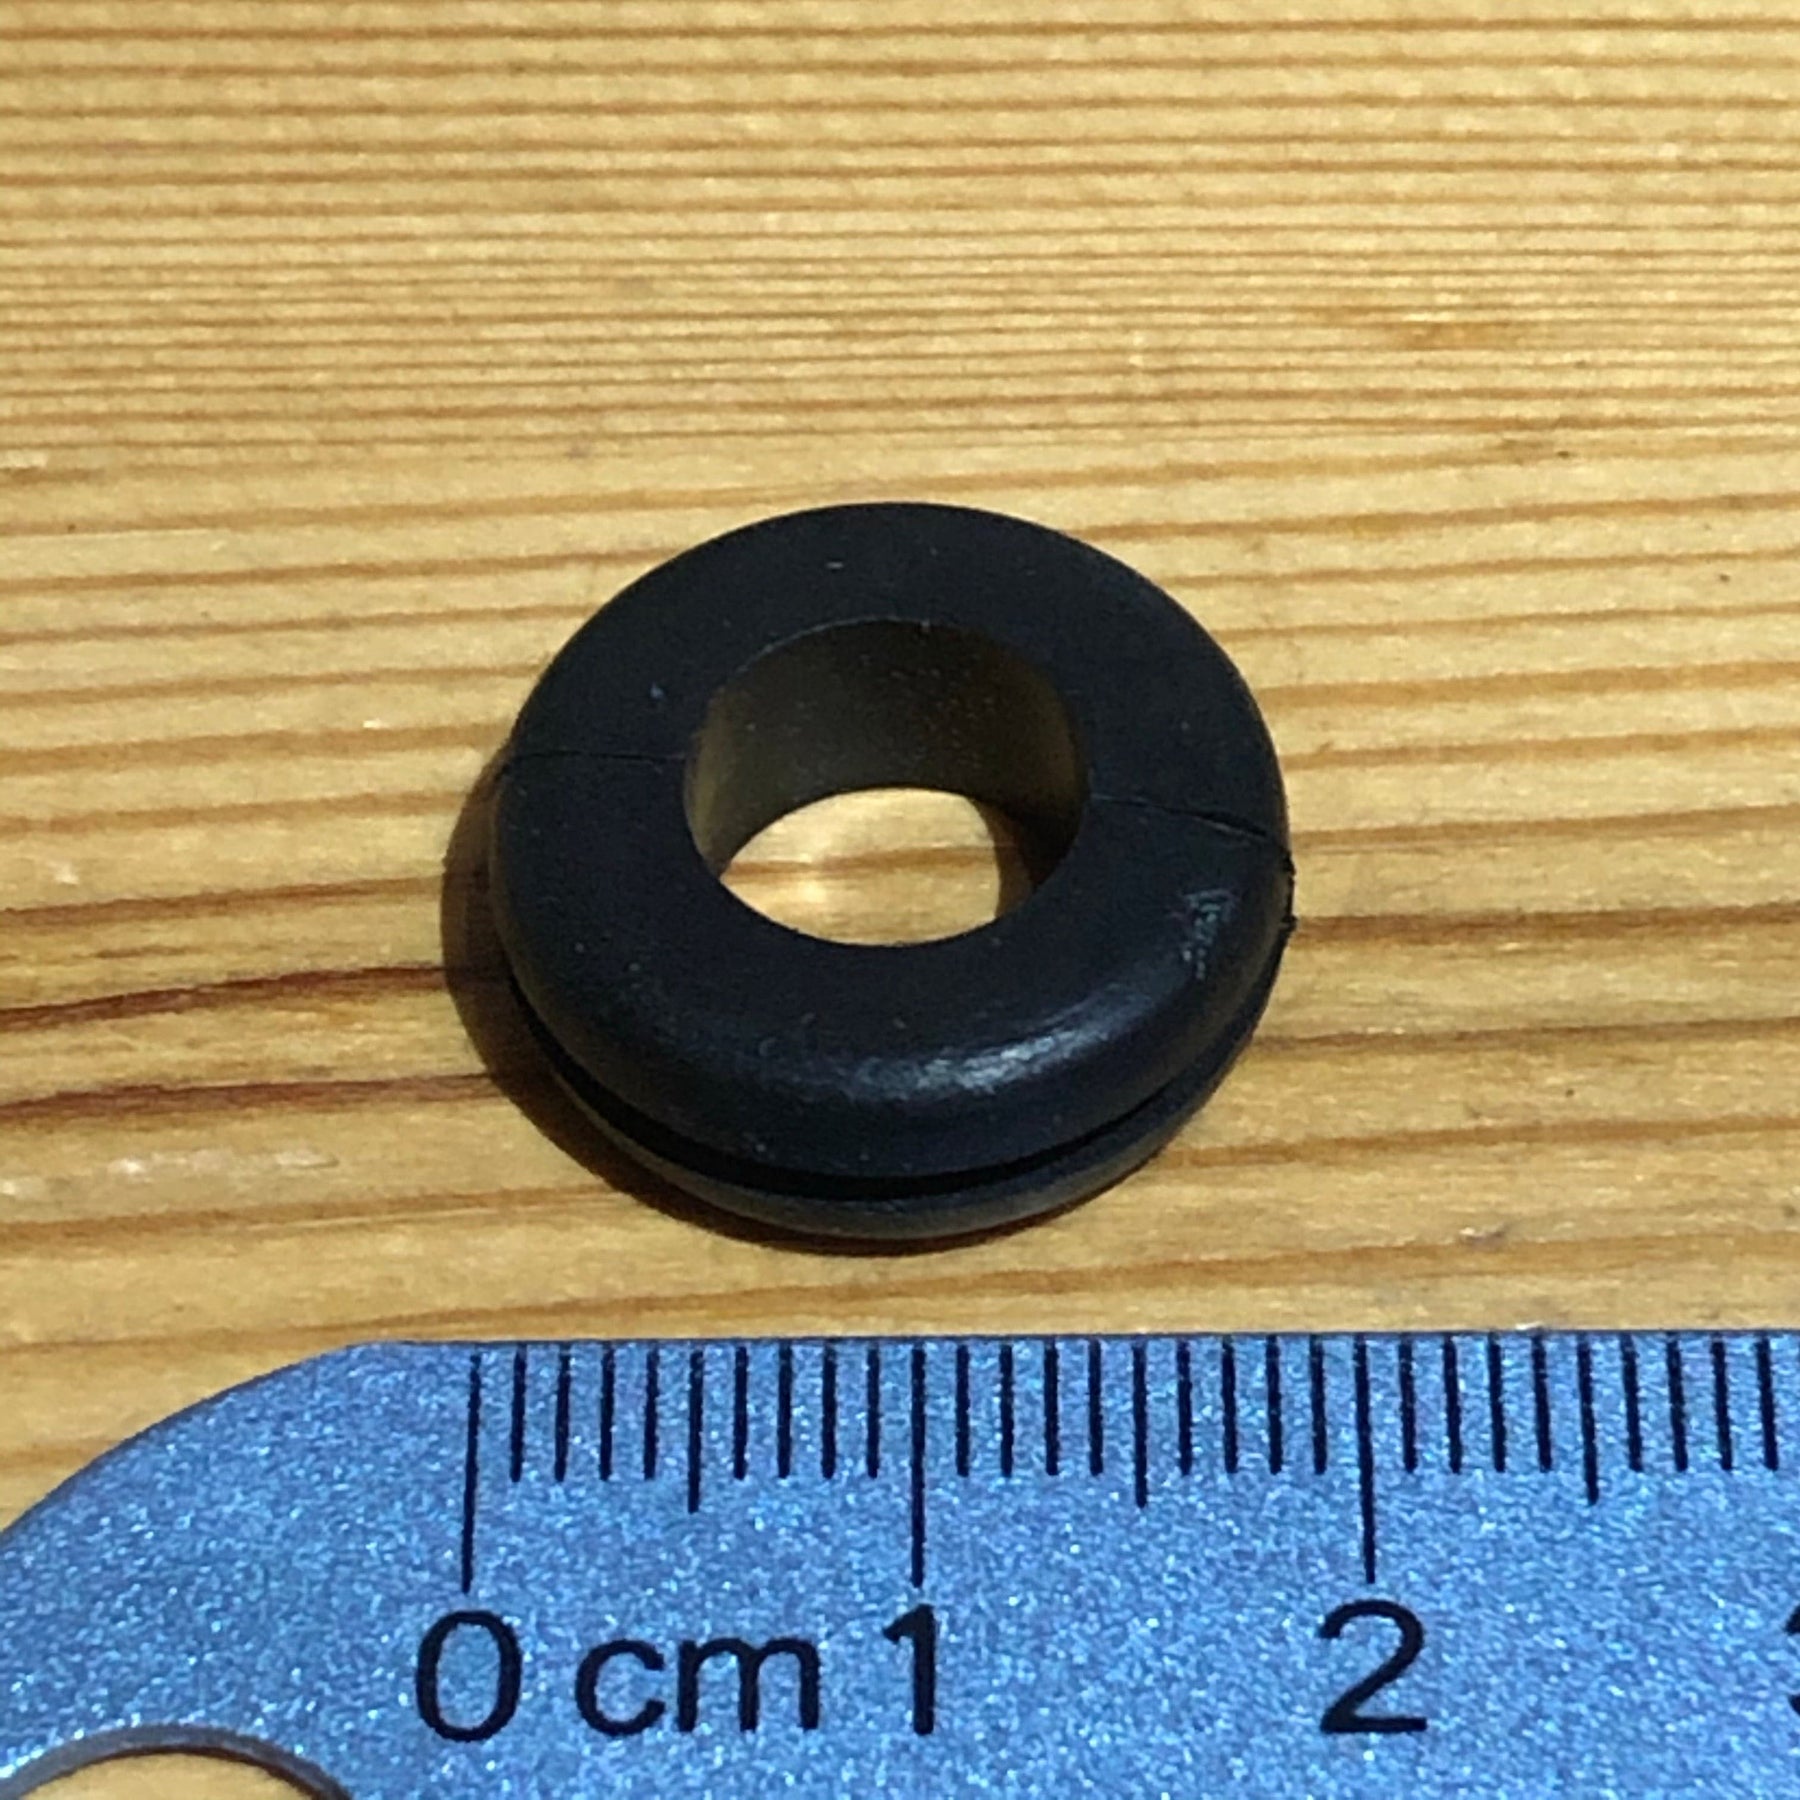 Grommet Seal for lid to Fit an Airlock - PVC - 12mm - Black